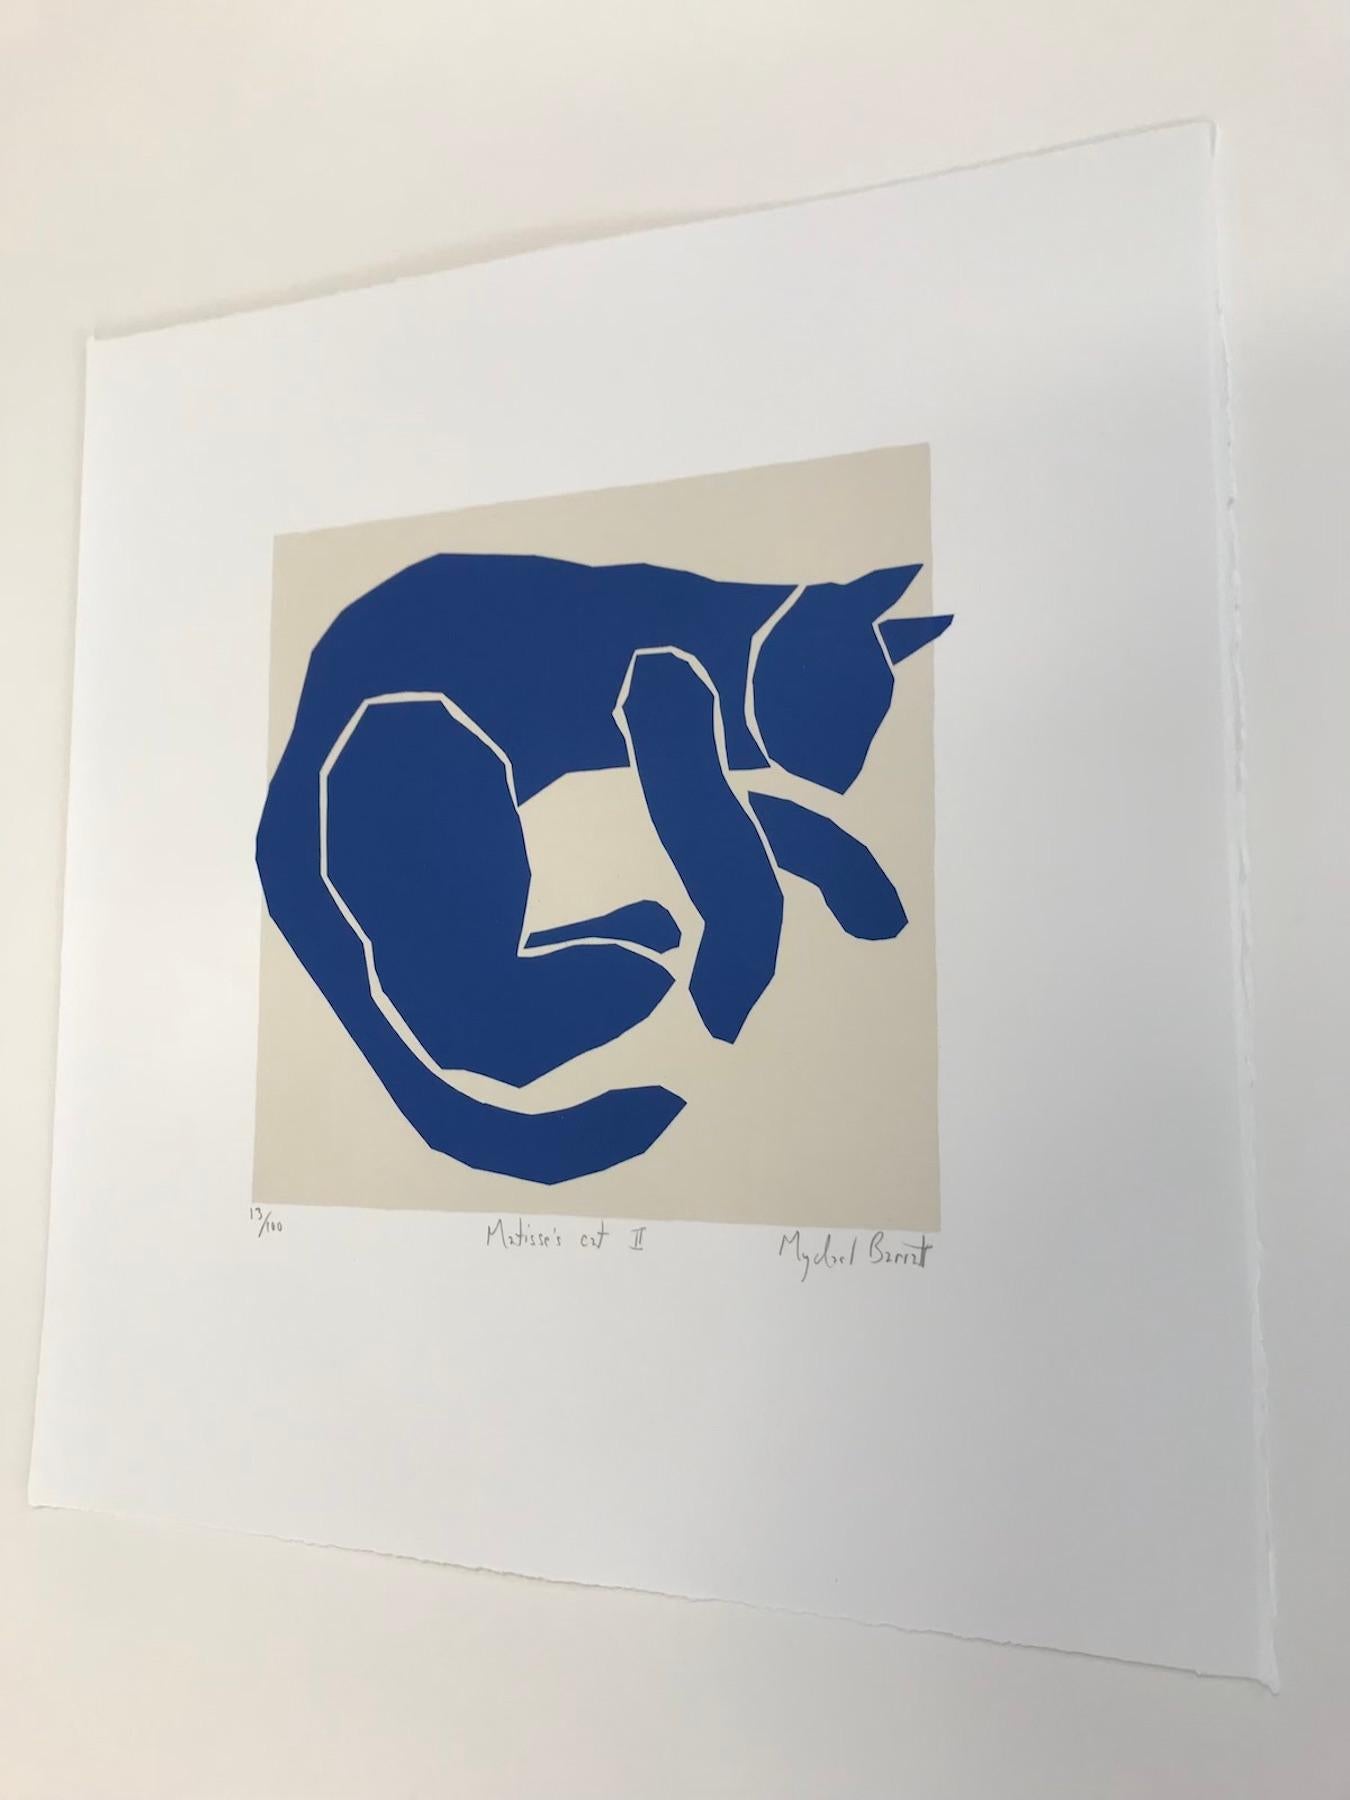 Matisse's Cat is a limited edition hand made print by artist Mychael Barratt which takes inspiration from the paper cutting work of Matisse in the 1940s.
Buy Mychael Barratt printmaker works with Wychwood Art gallery online. Mychael Barratt was born